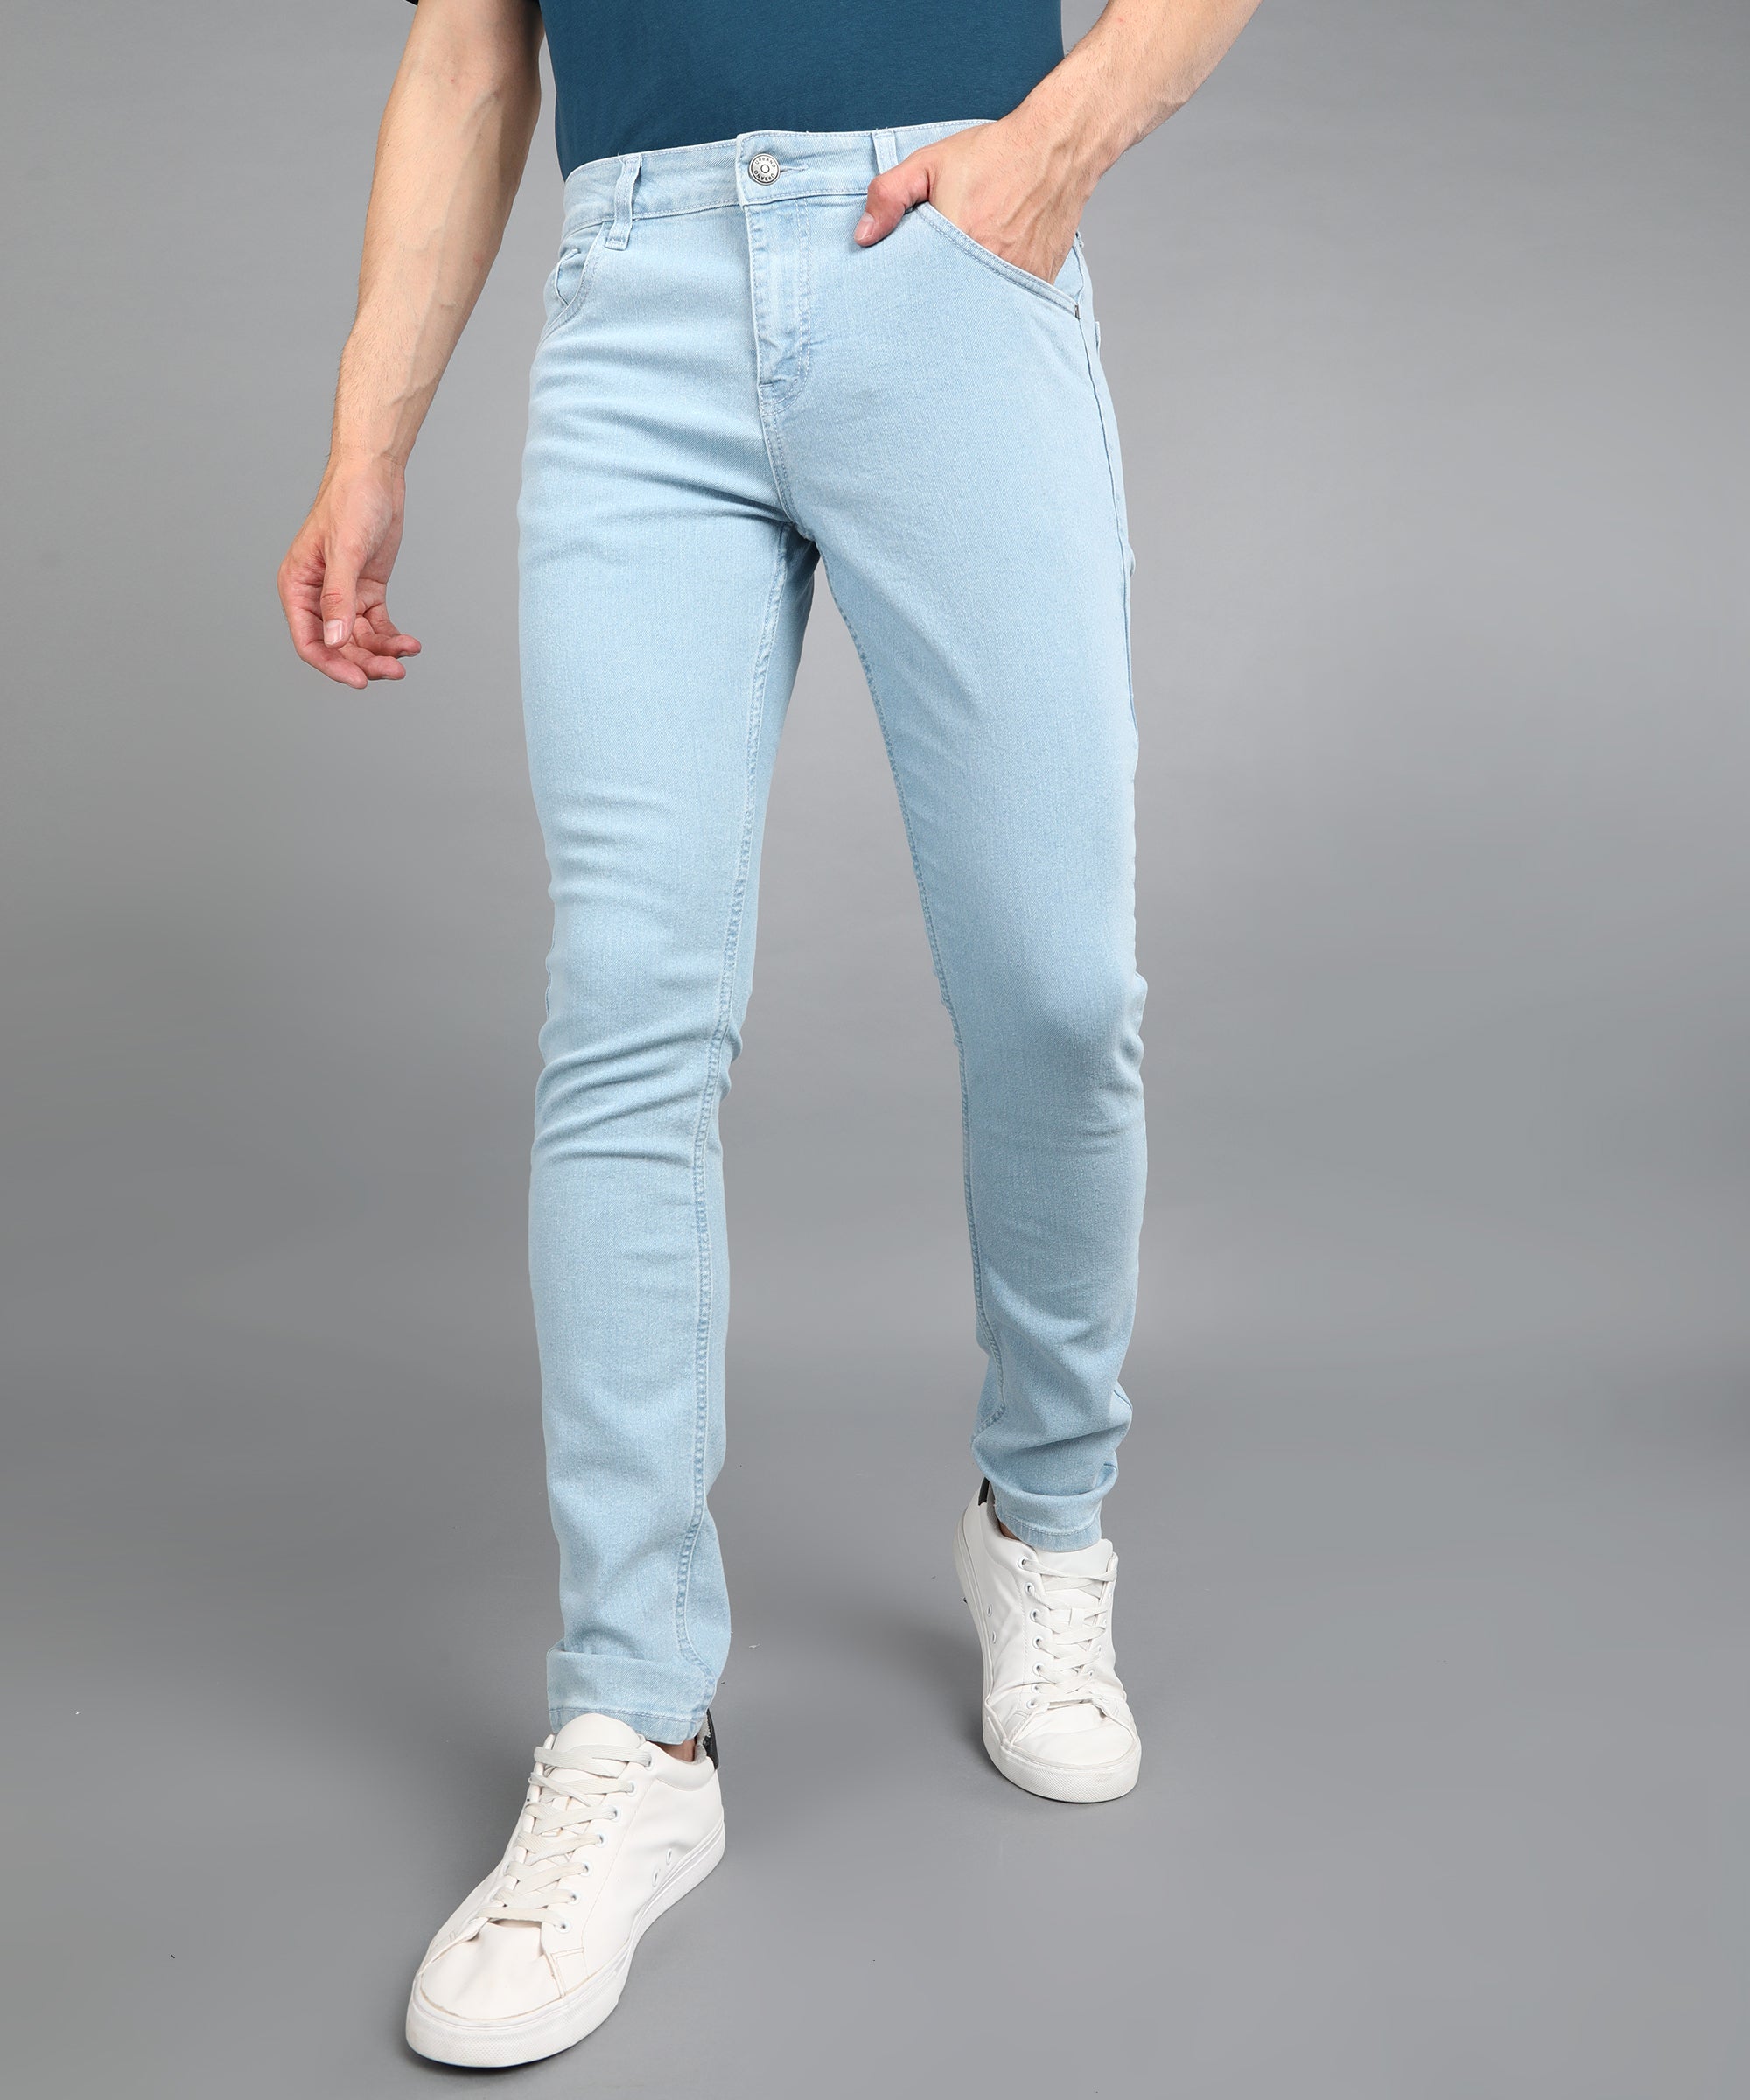 Urbano Fashion Men's Ice Blue Regular Fit Washed Jeans Stretchable